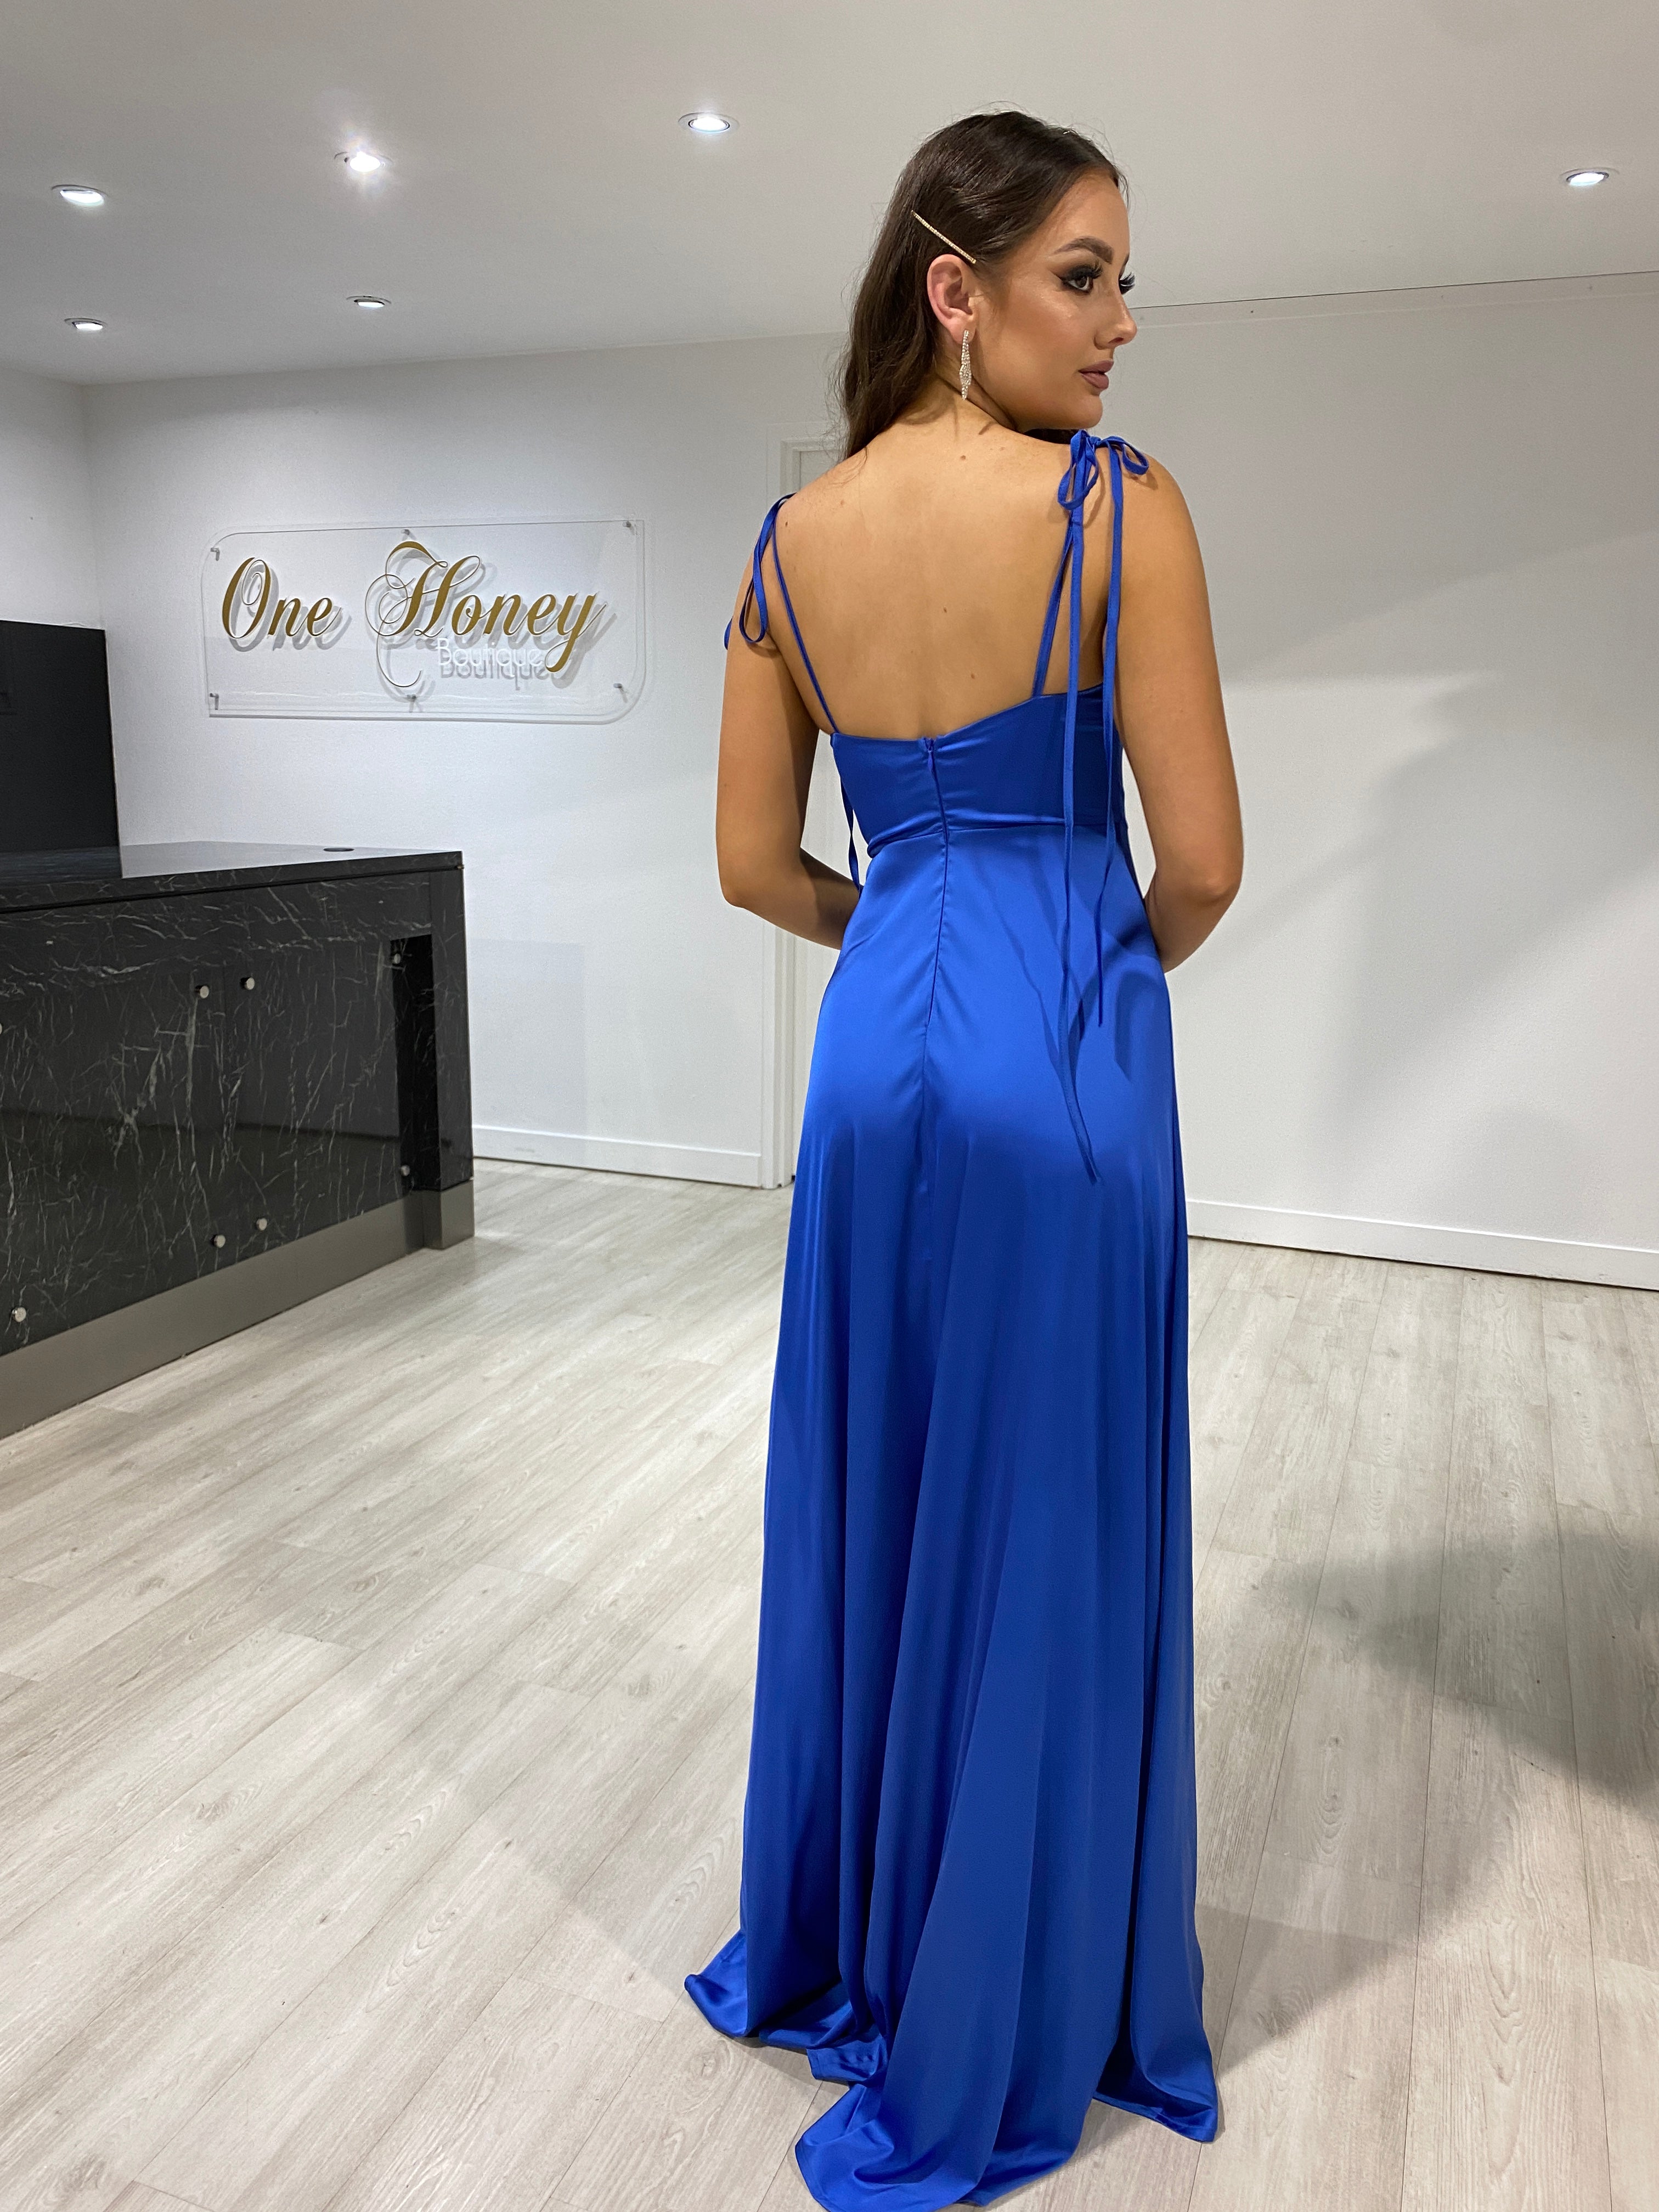 Honey Couture XENIA Blue Tie Up Formal Bridesmaid Dress